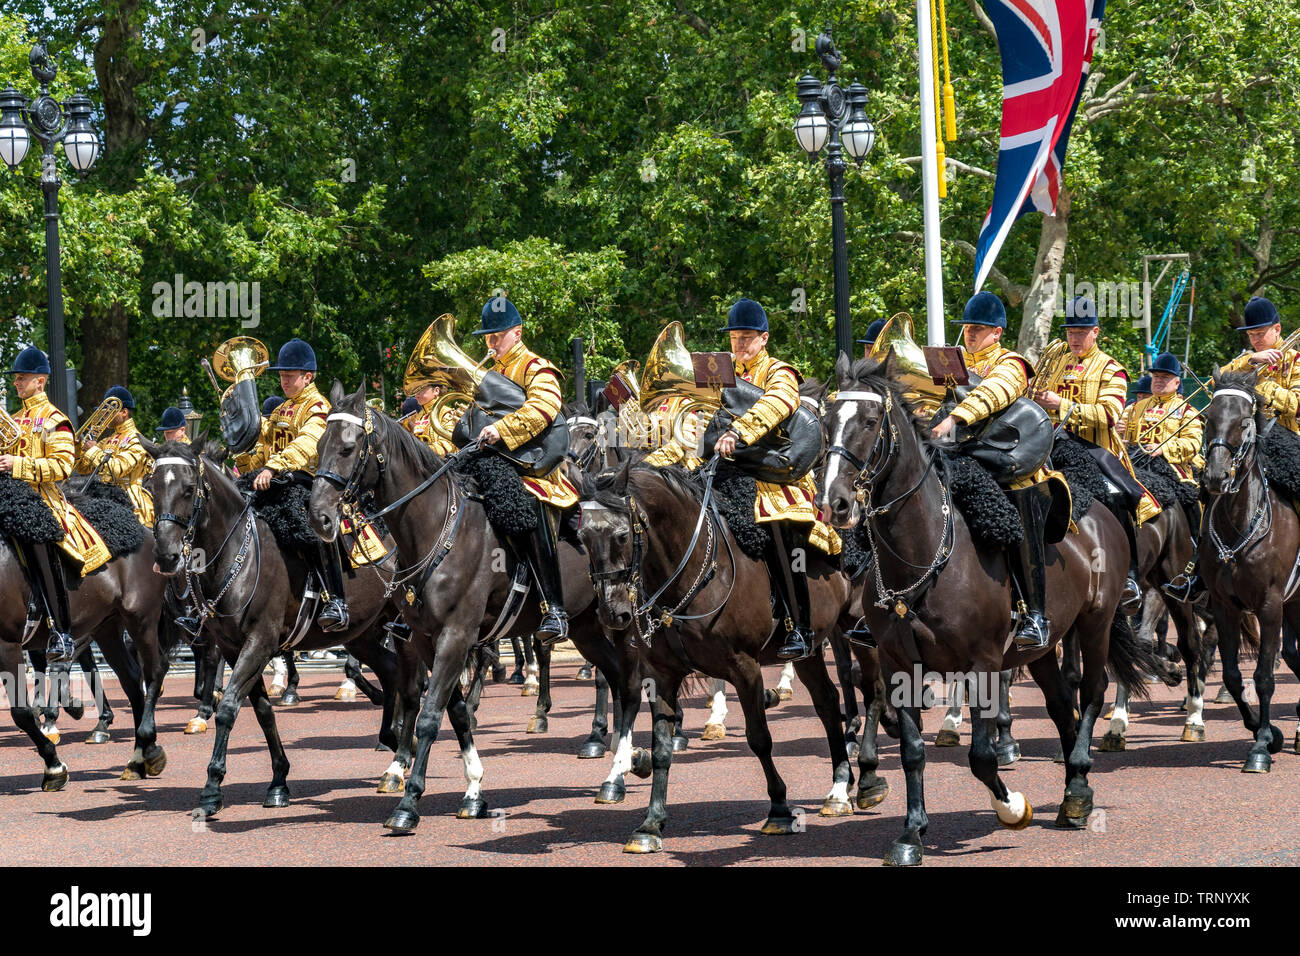 The Mounted Band of The Household Cavalry on The Mall at The Trooping The Colour Ceremony, London, UK, 2019 Stock Photo